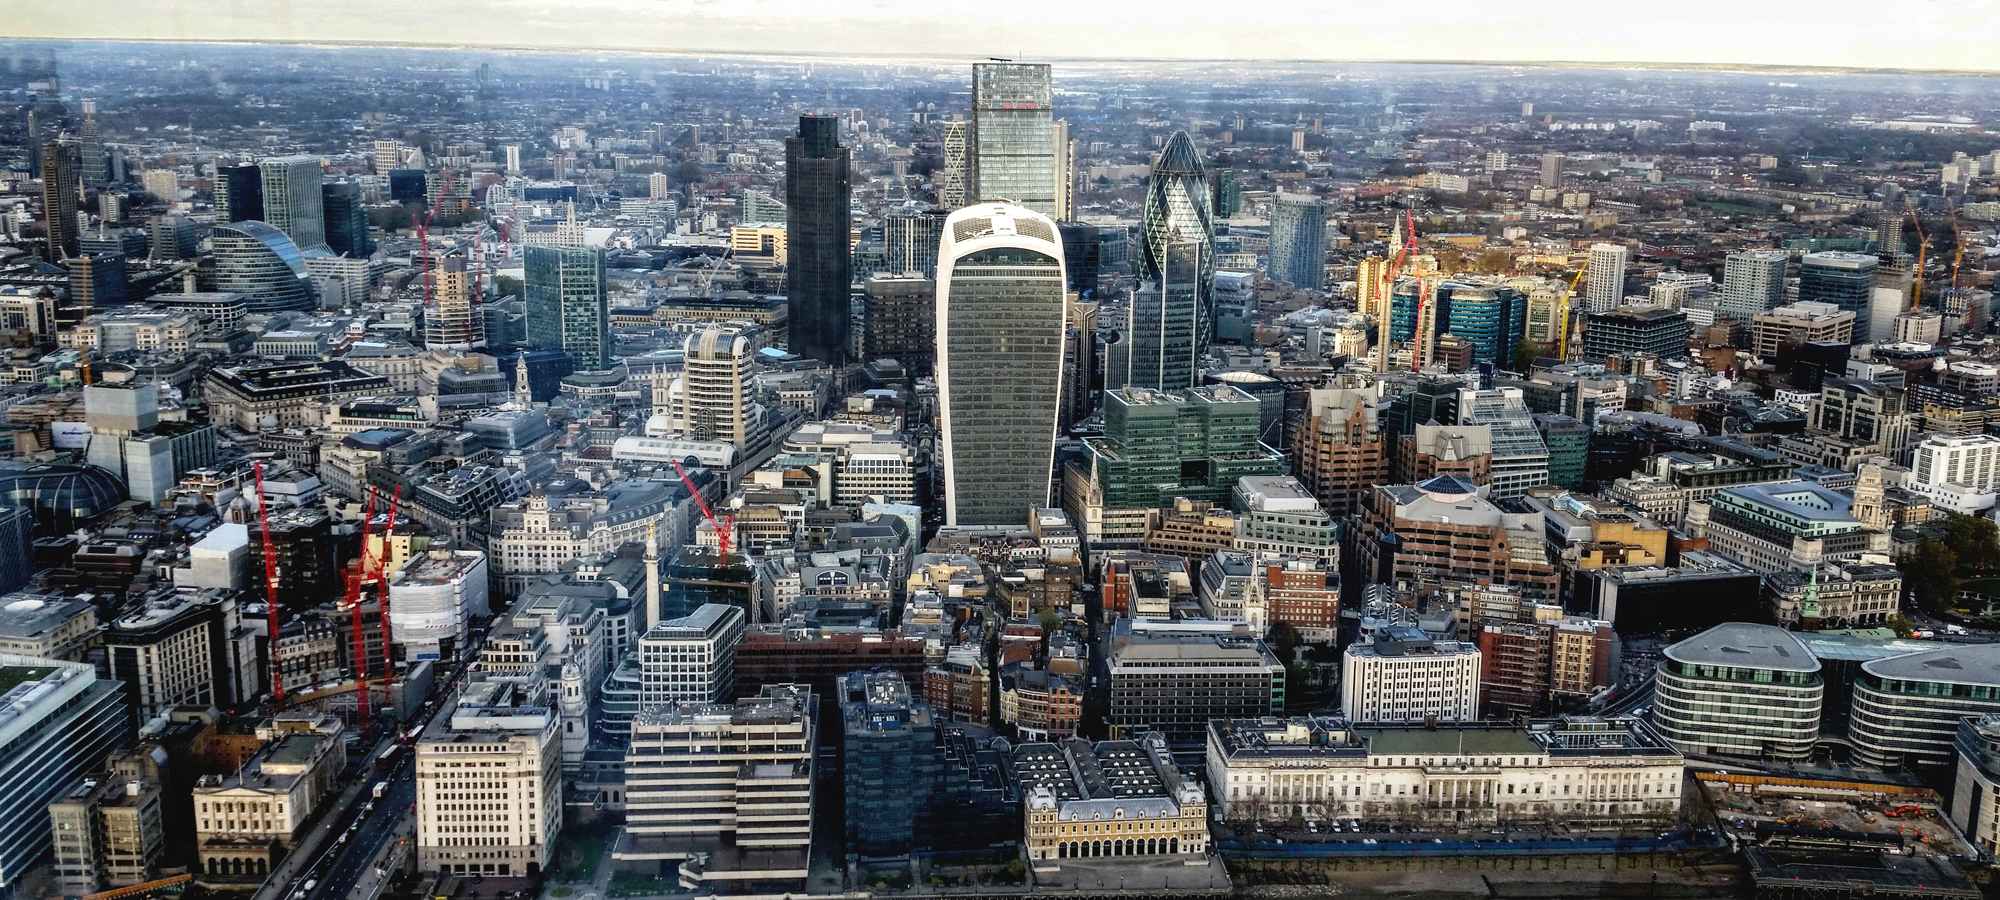 Structure Tone To Deliver Their First Project In London’s Walkie Talkie